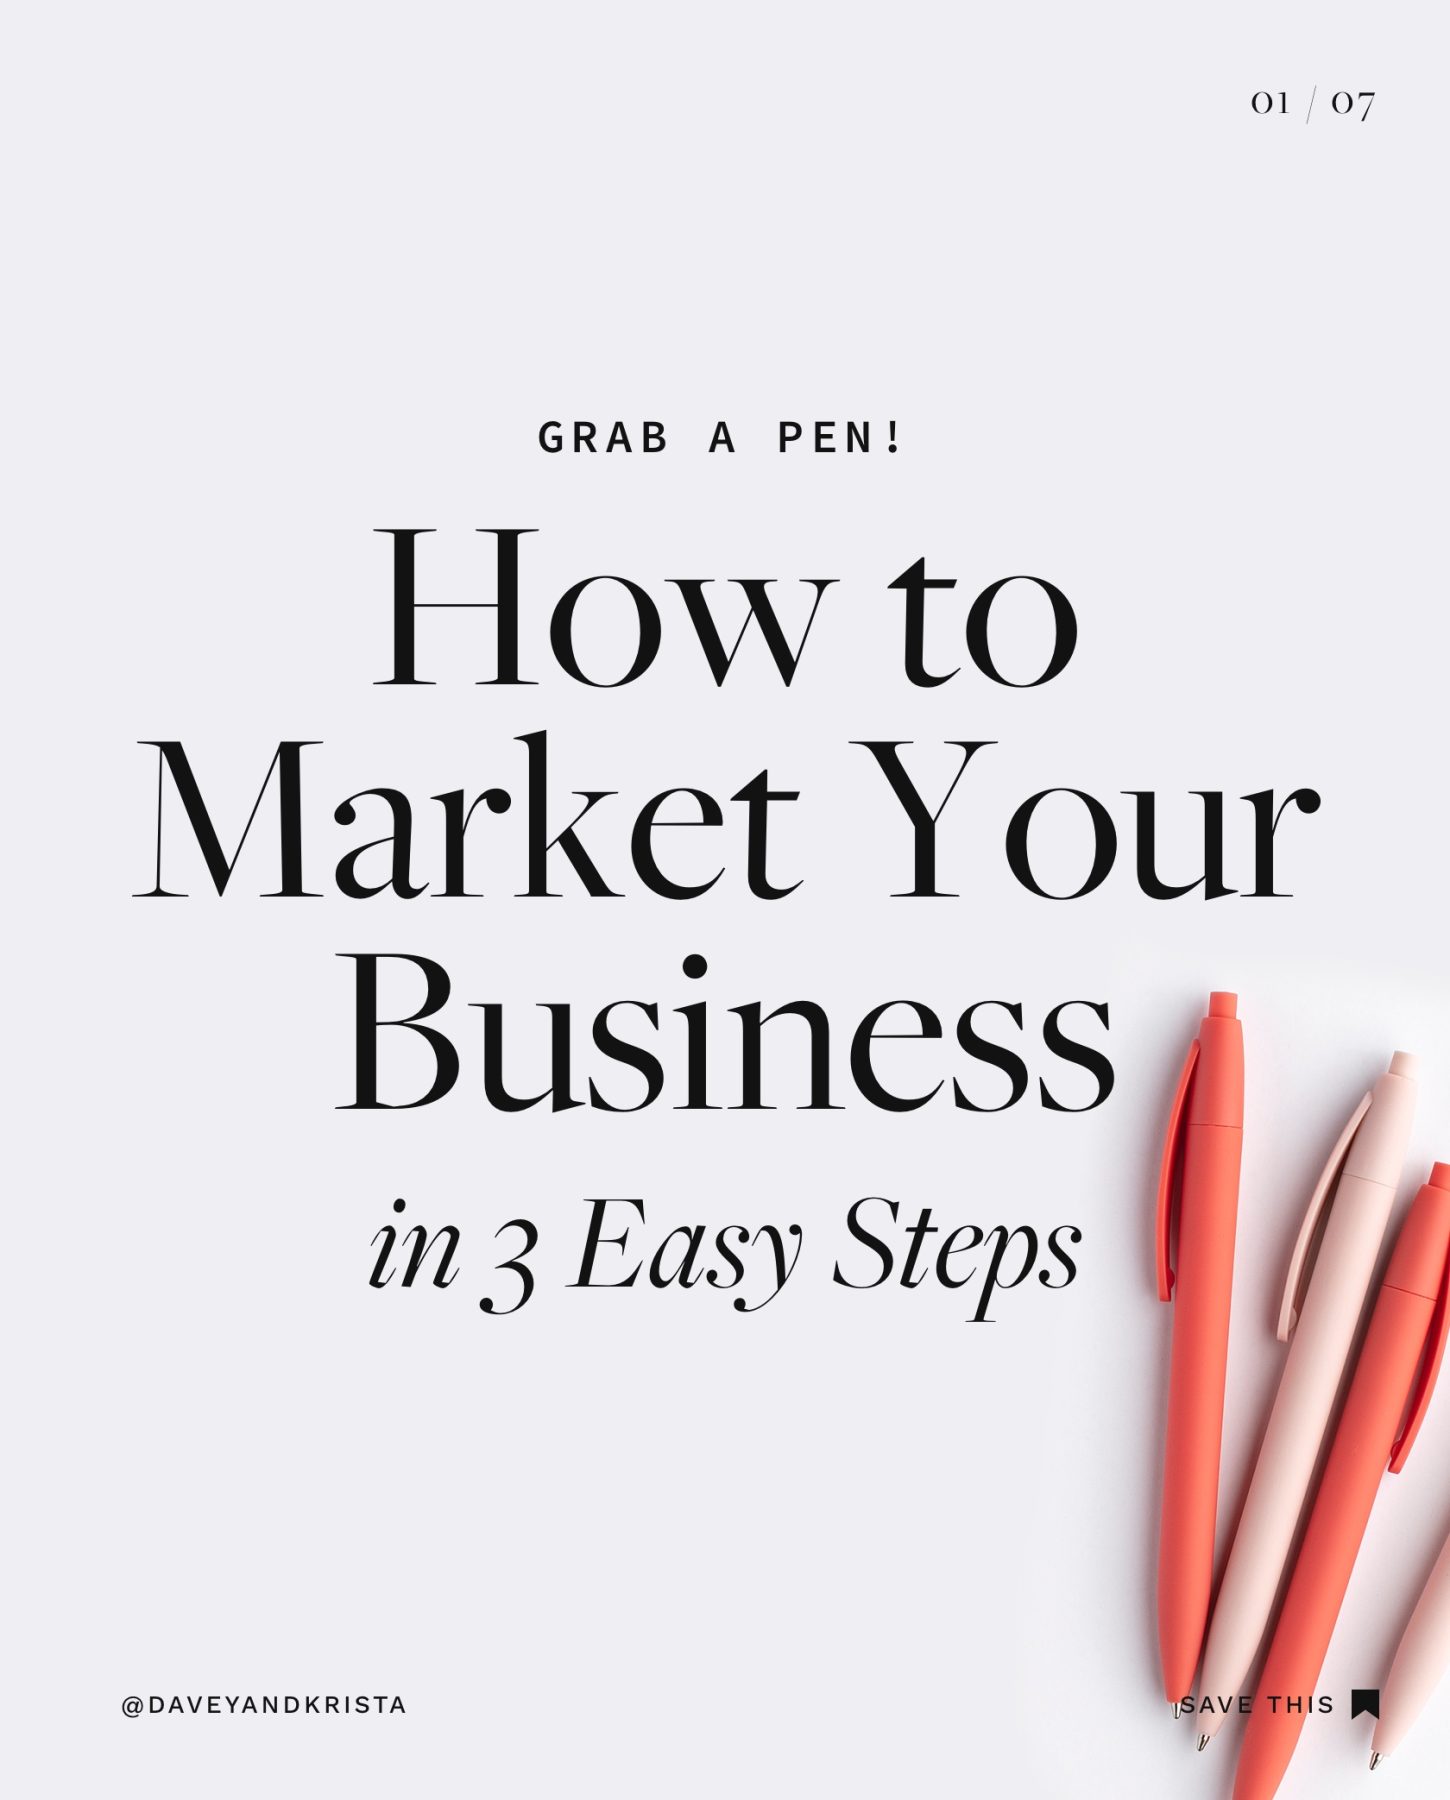 How to Market Your Business in 3 Easy Steps | Davey & Krista
